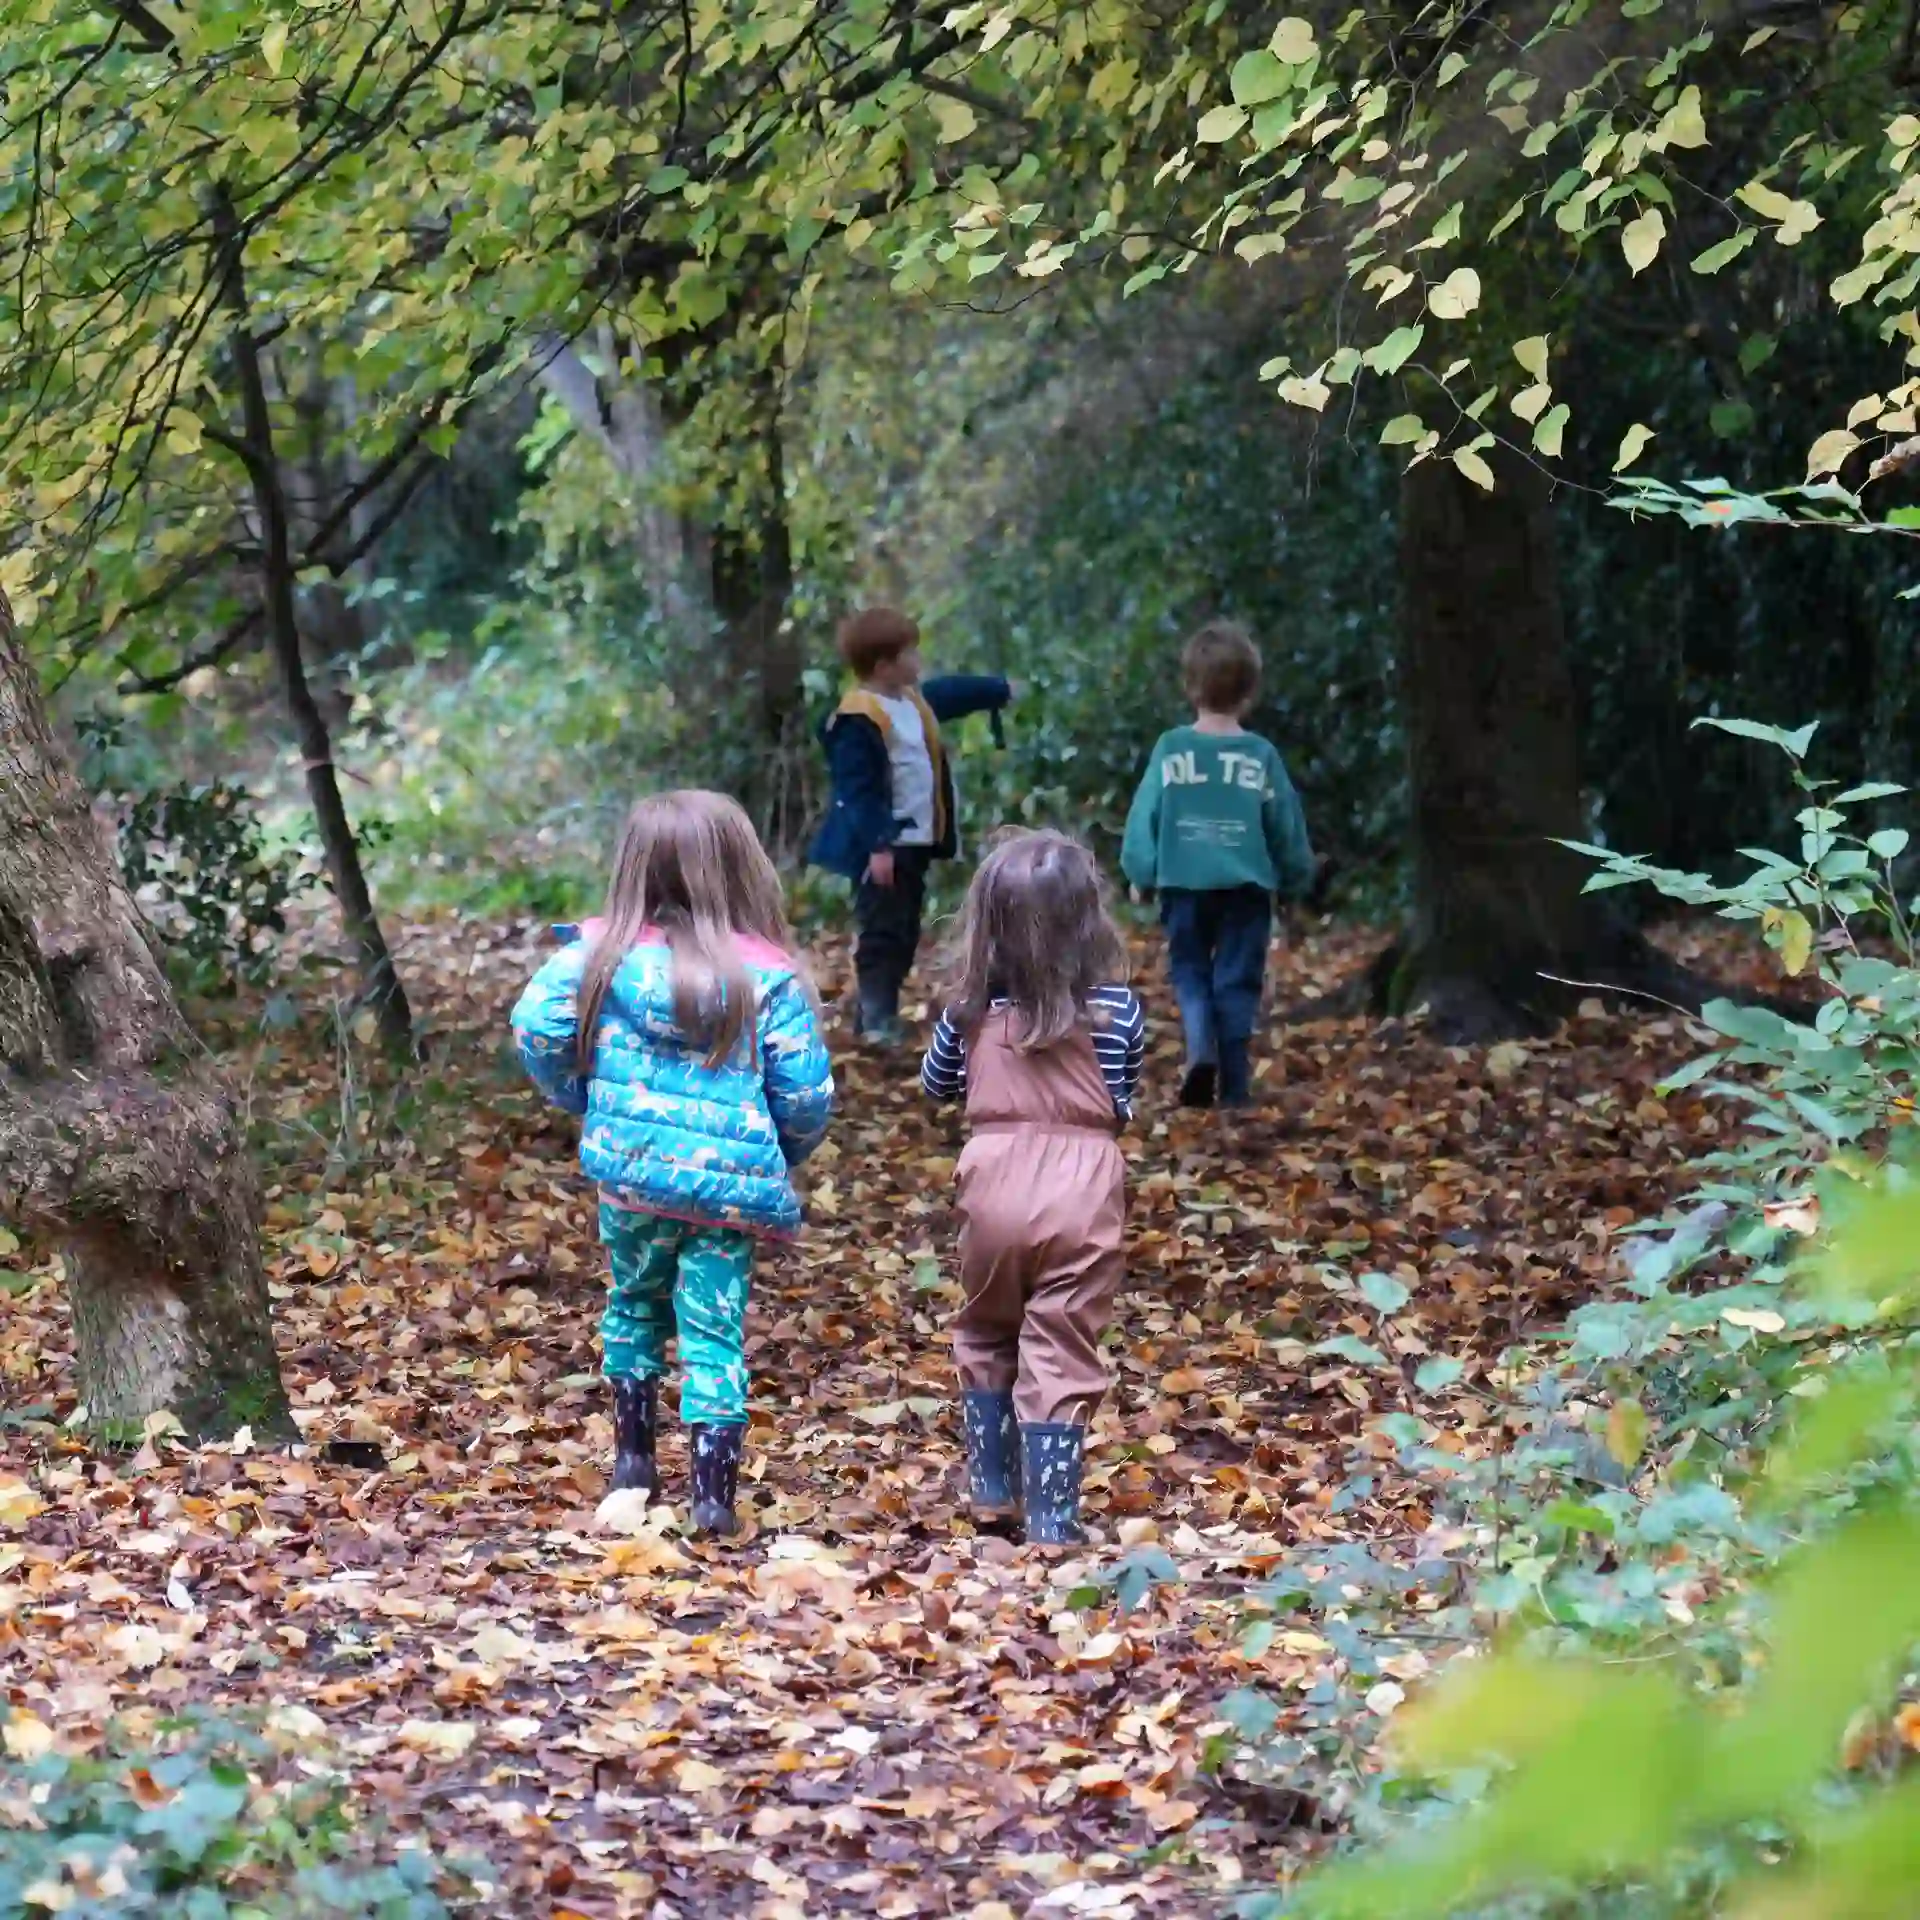 A group of children exploring the forest.